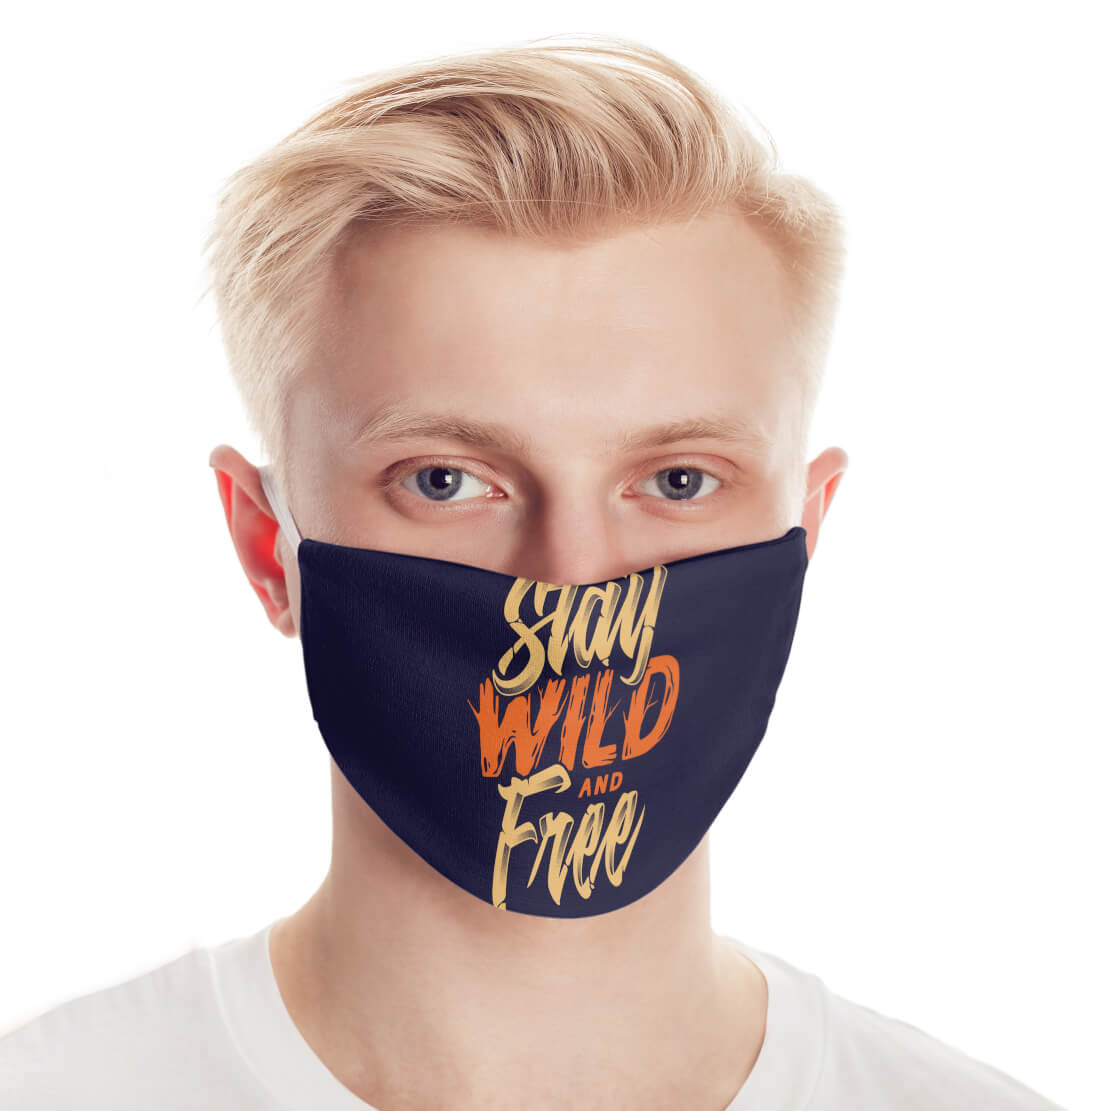 Stay Wild and Free Mask-Image5